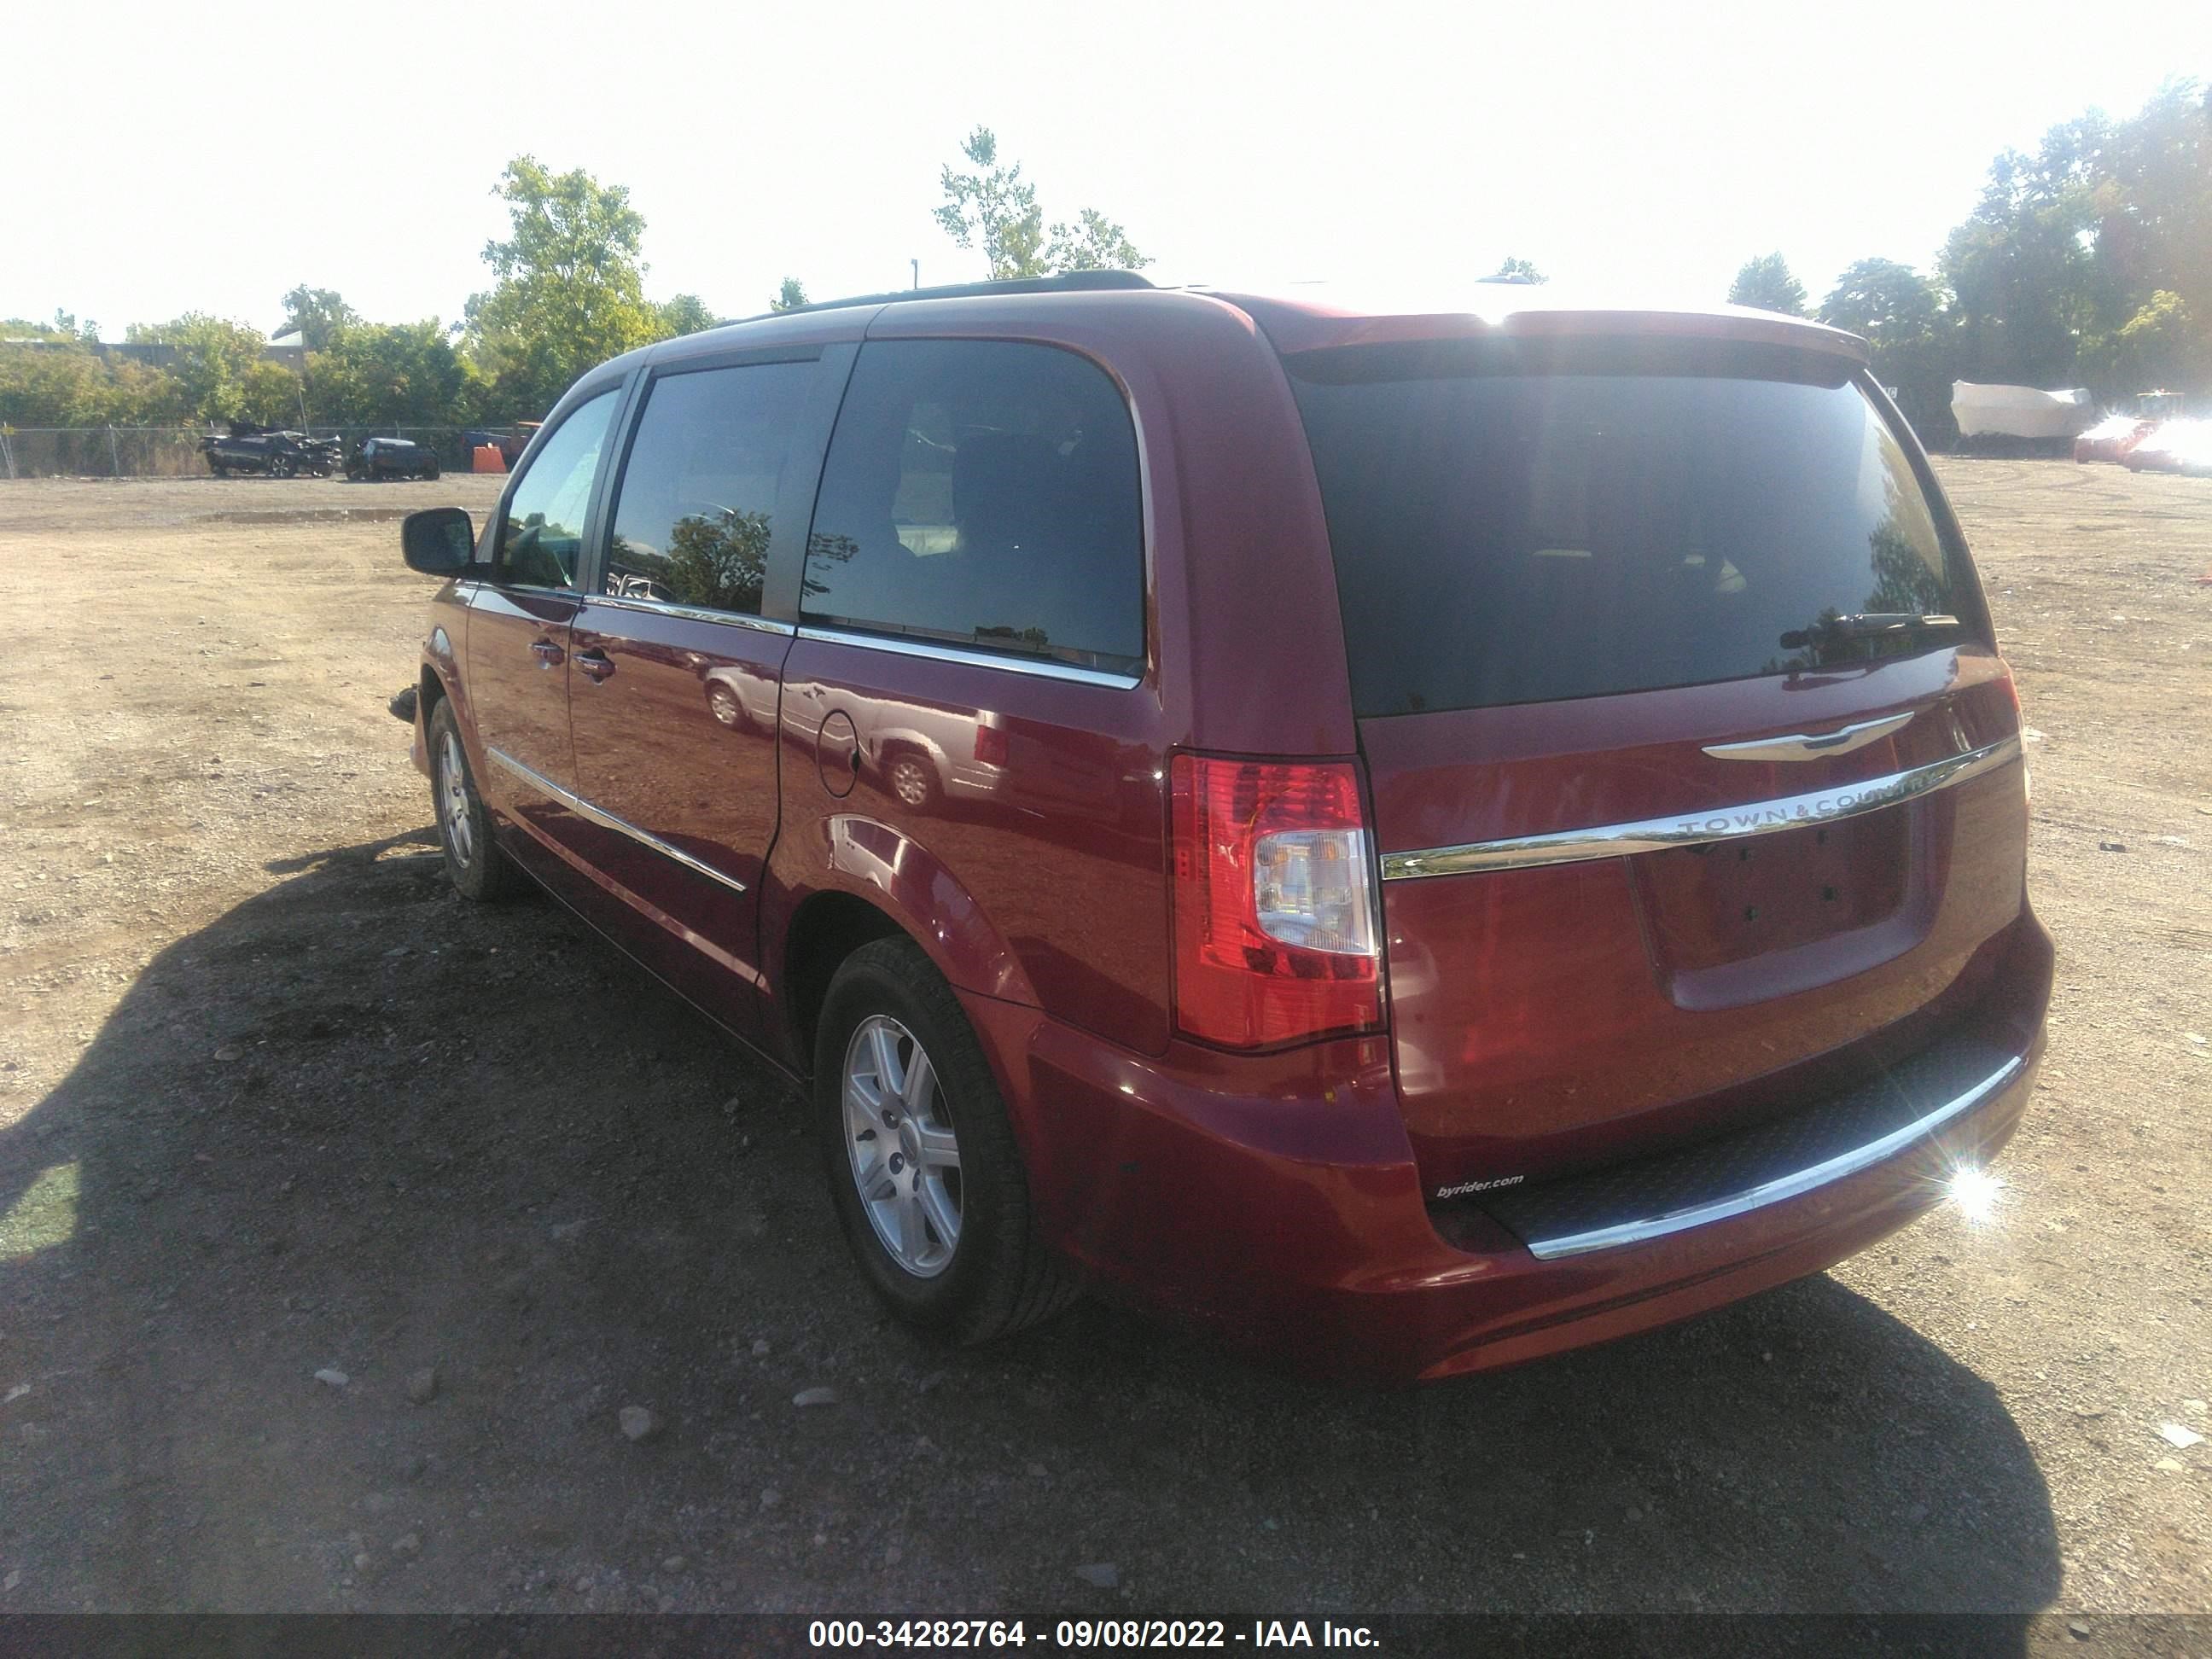 2011 CHRYSLER TOWN & COUNTRY TOURING VIN: 2A4RR5DG1BR716409